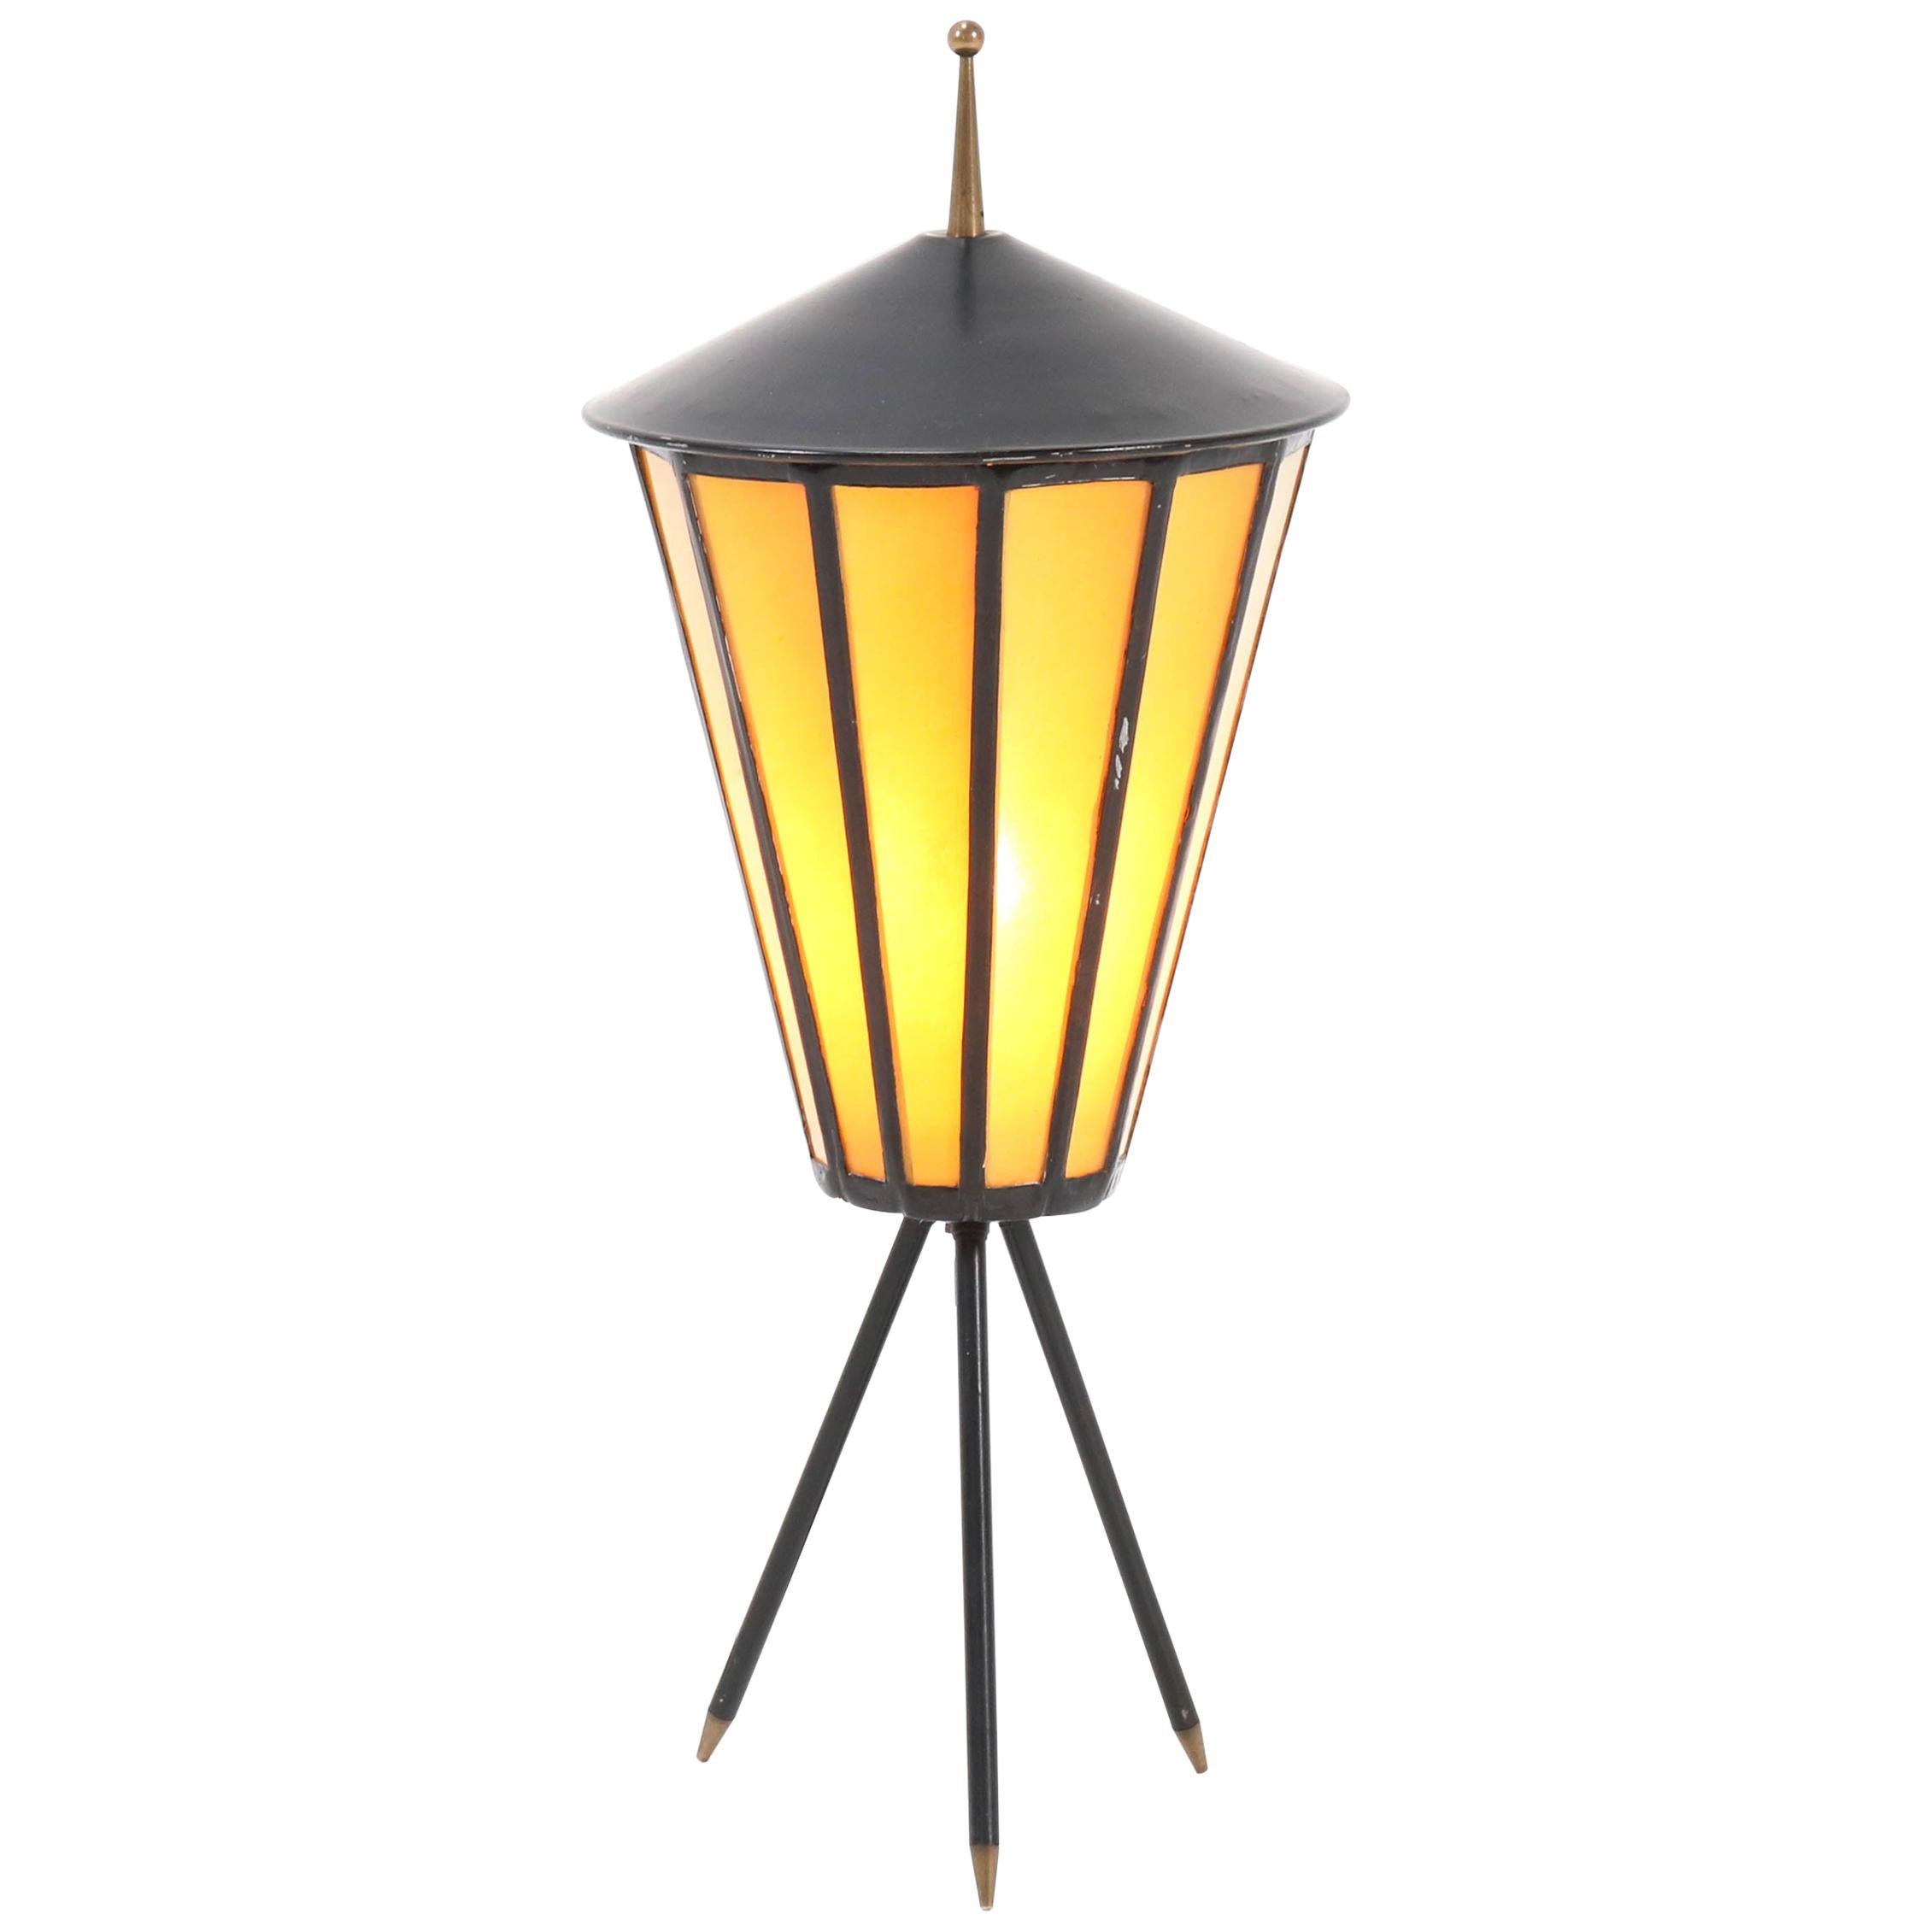 French Mid-Century Modern Table Lamp, 1950s